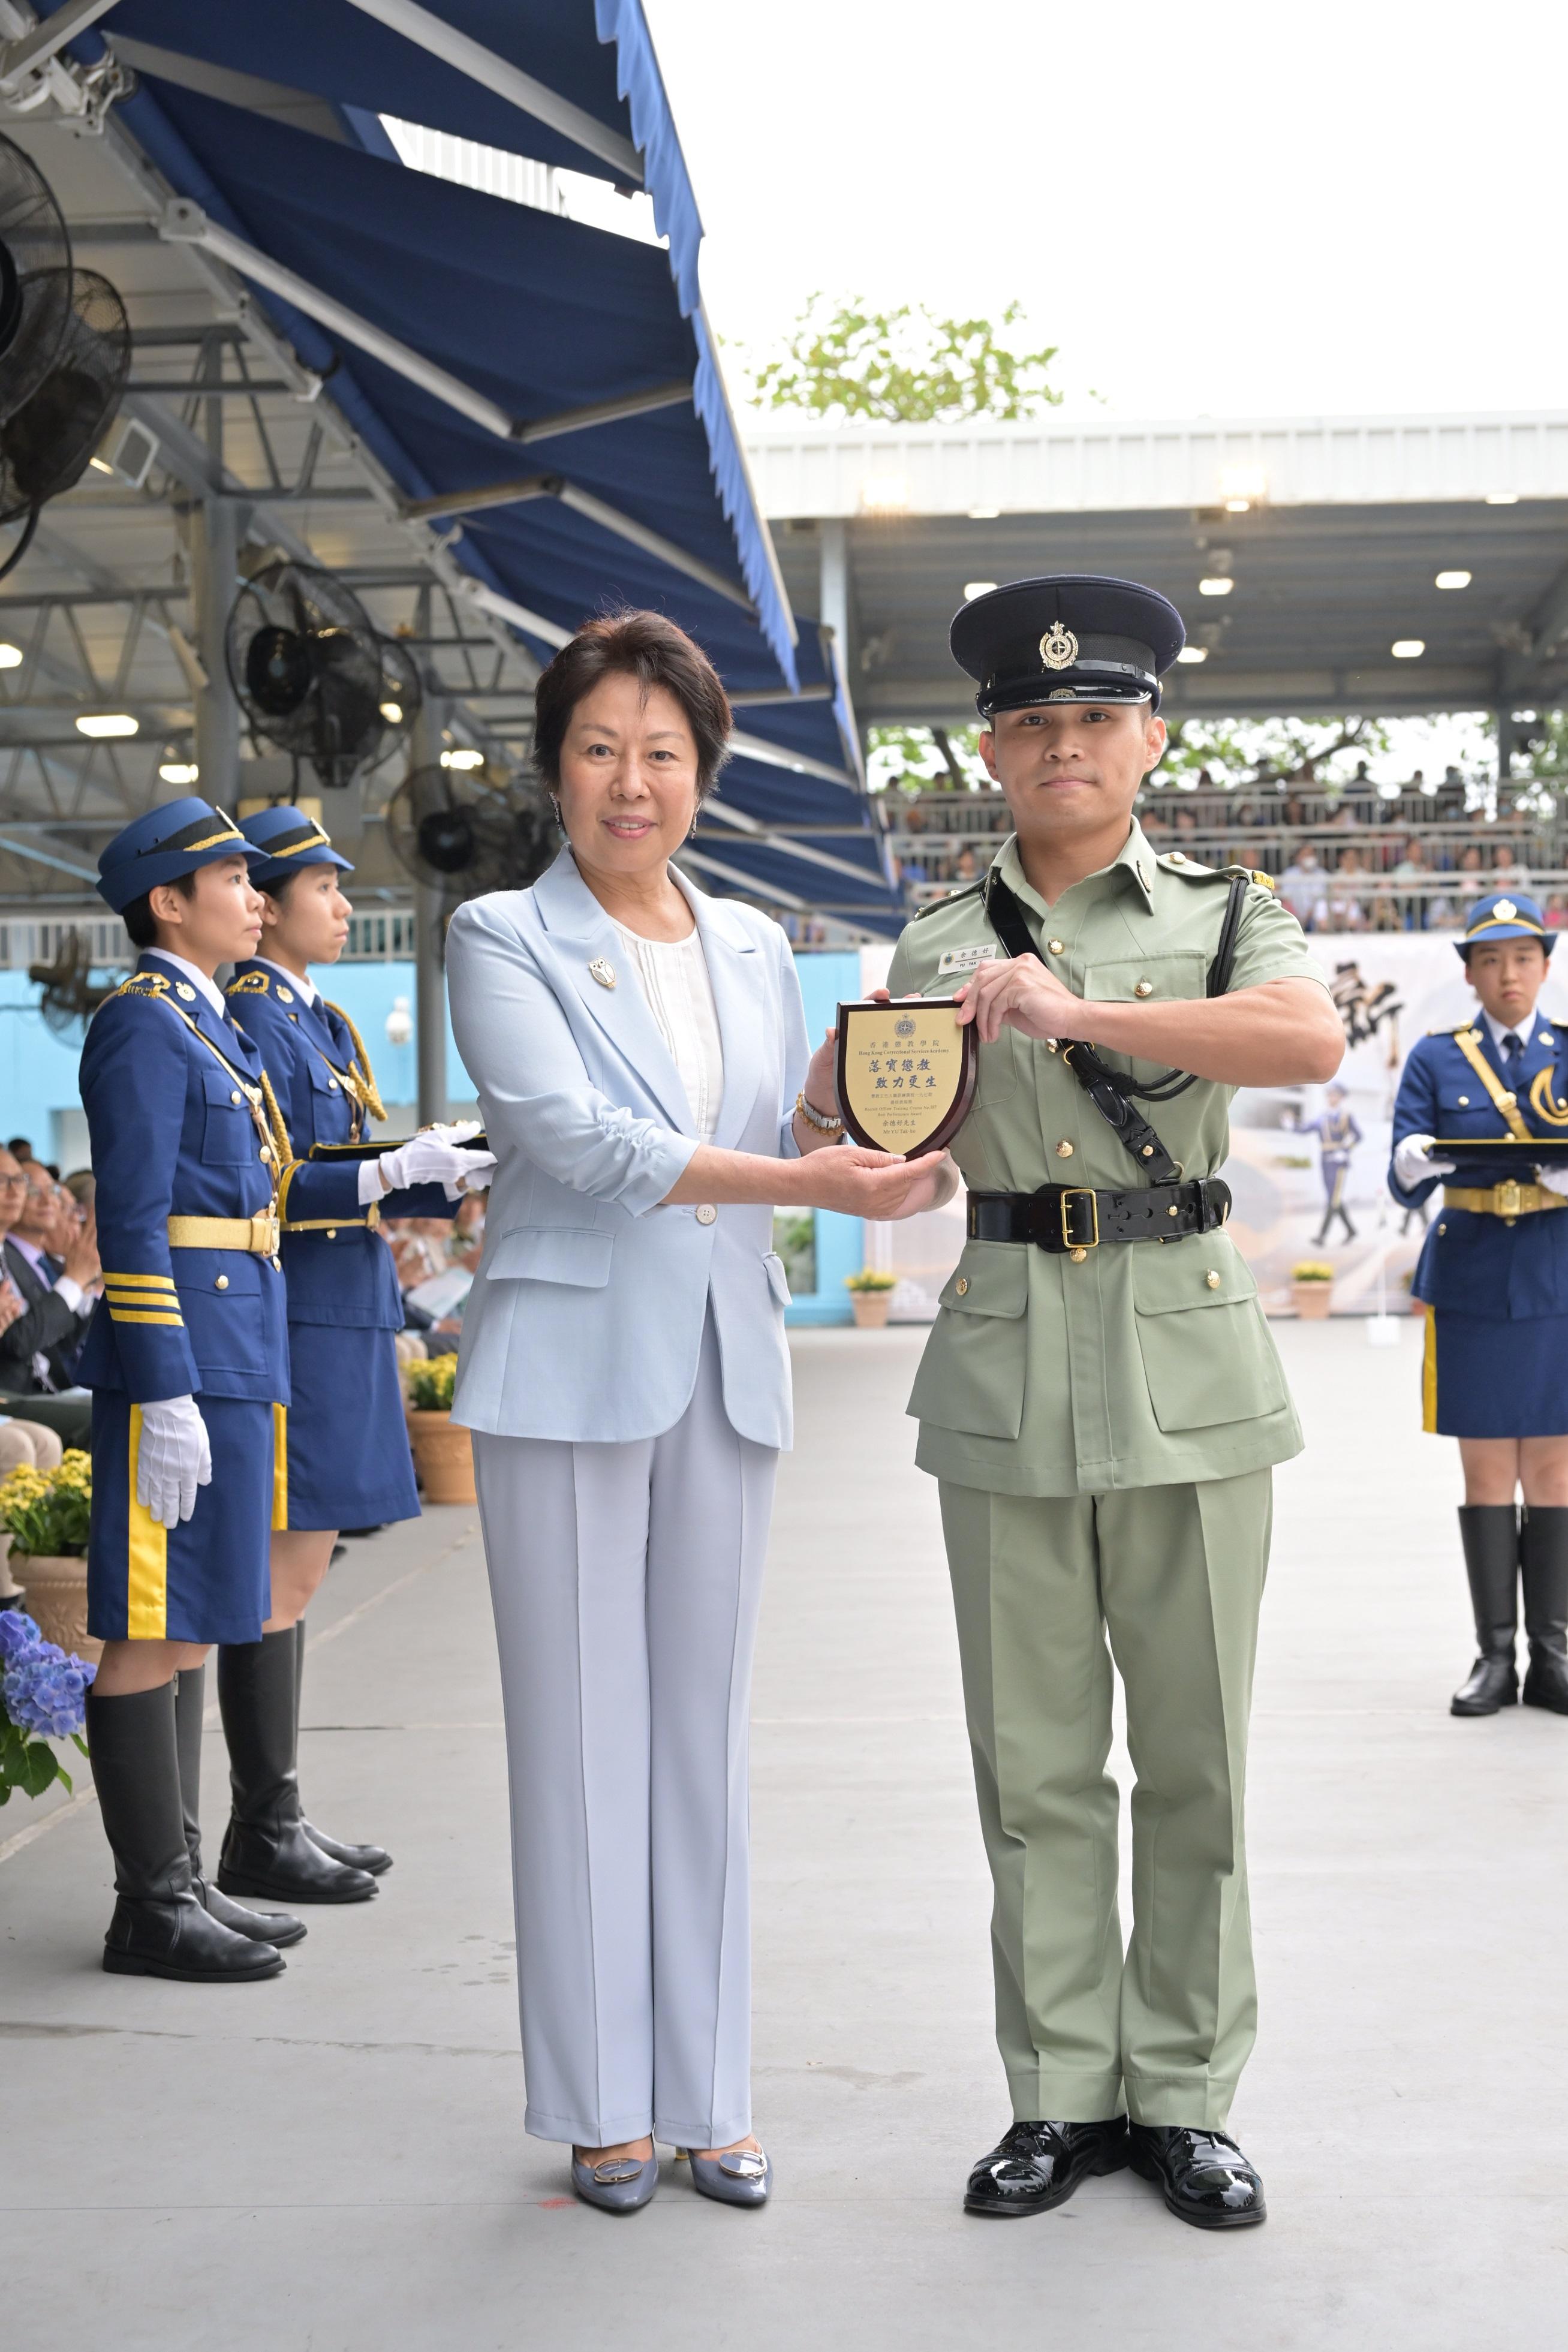 The Correctional Services Department held a passing-out parade at the Hong Kong Correctional Services Academy today (April 21). Photo shows the Chairman of the Committee on Community Support for Rehabilitated Offenders, Ms Tsui Li (left), presenting a Best Recruit Award, the Principal’s Shield, to Officer Mr Yu Tak-ho.